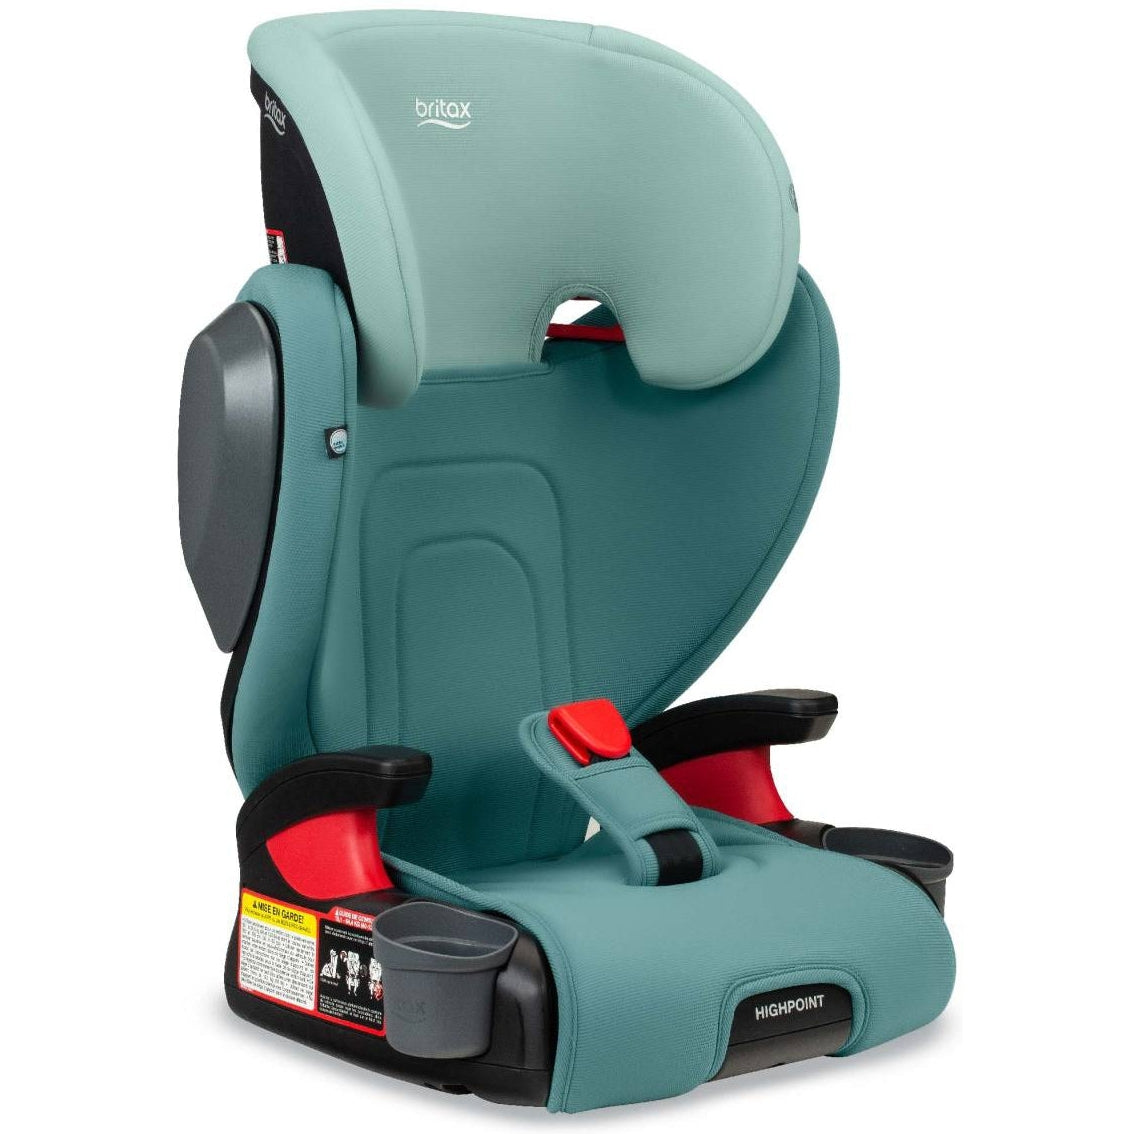 Buy green-ombre Britax Highpoint Backless Belt-Positioning Booster Seat with Safewash